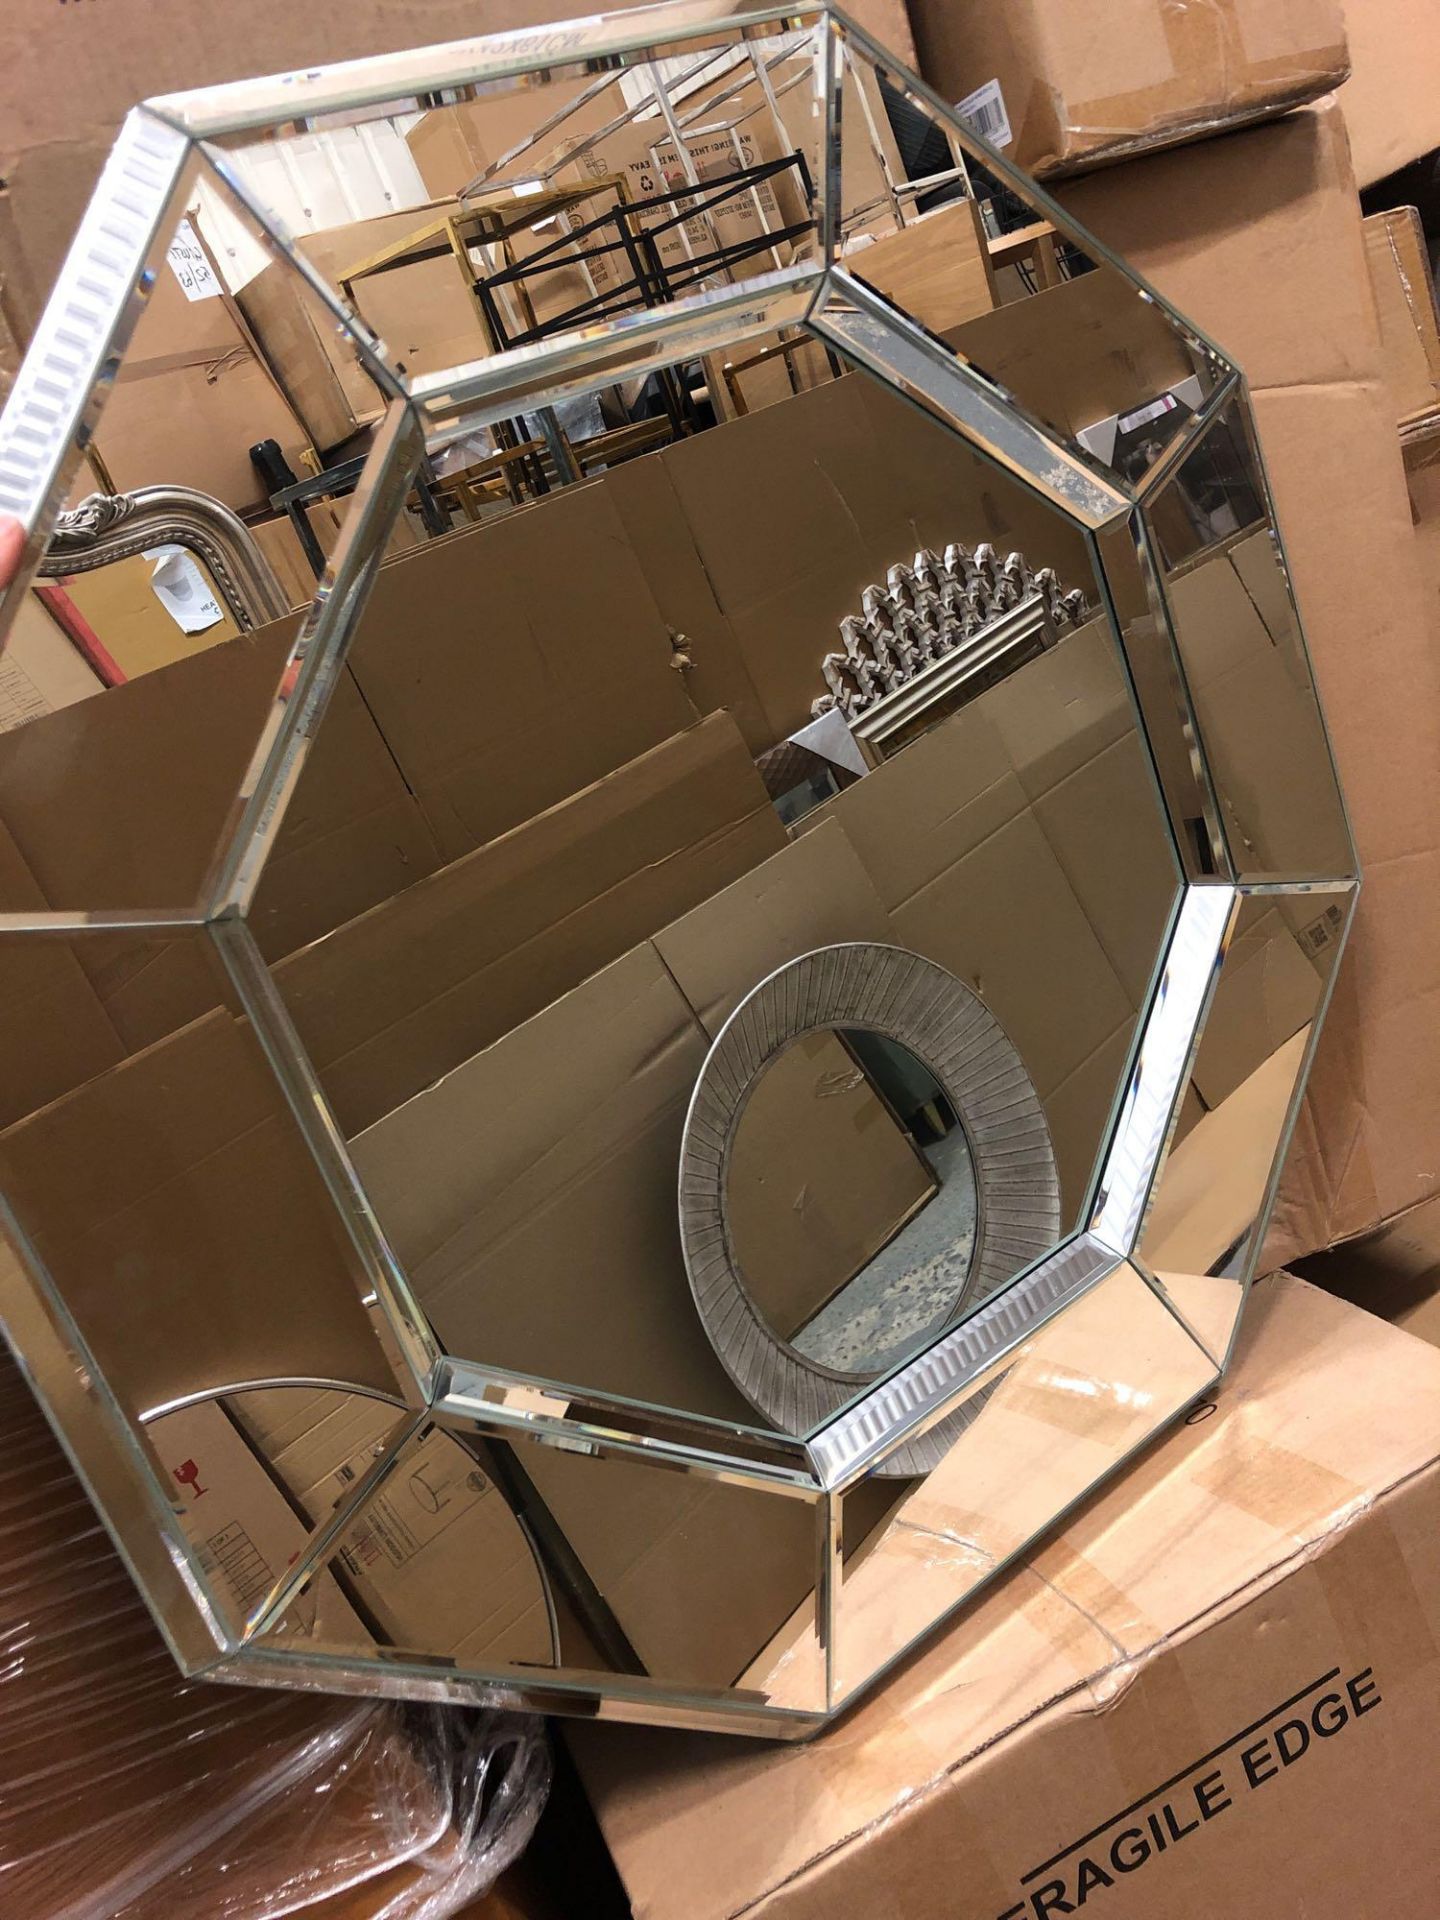 Vienna Octagon Mirror 800 x 800mm This Simply Designed Octagonal Mirror Is The Mirror You Need In - Image 2 of 2